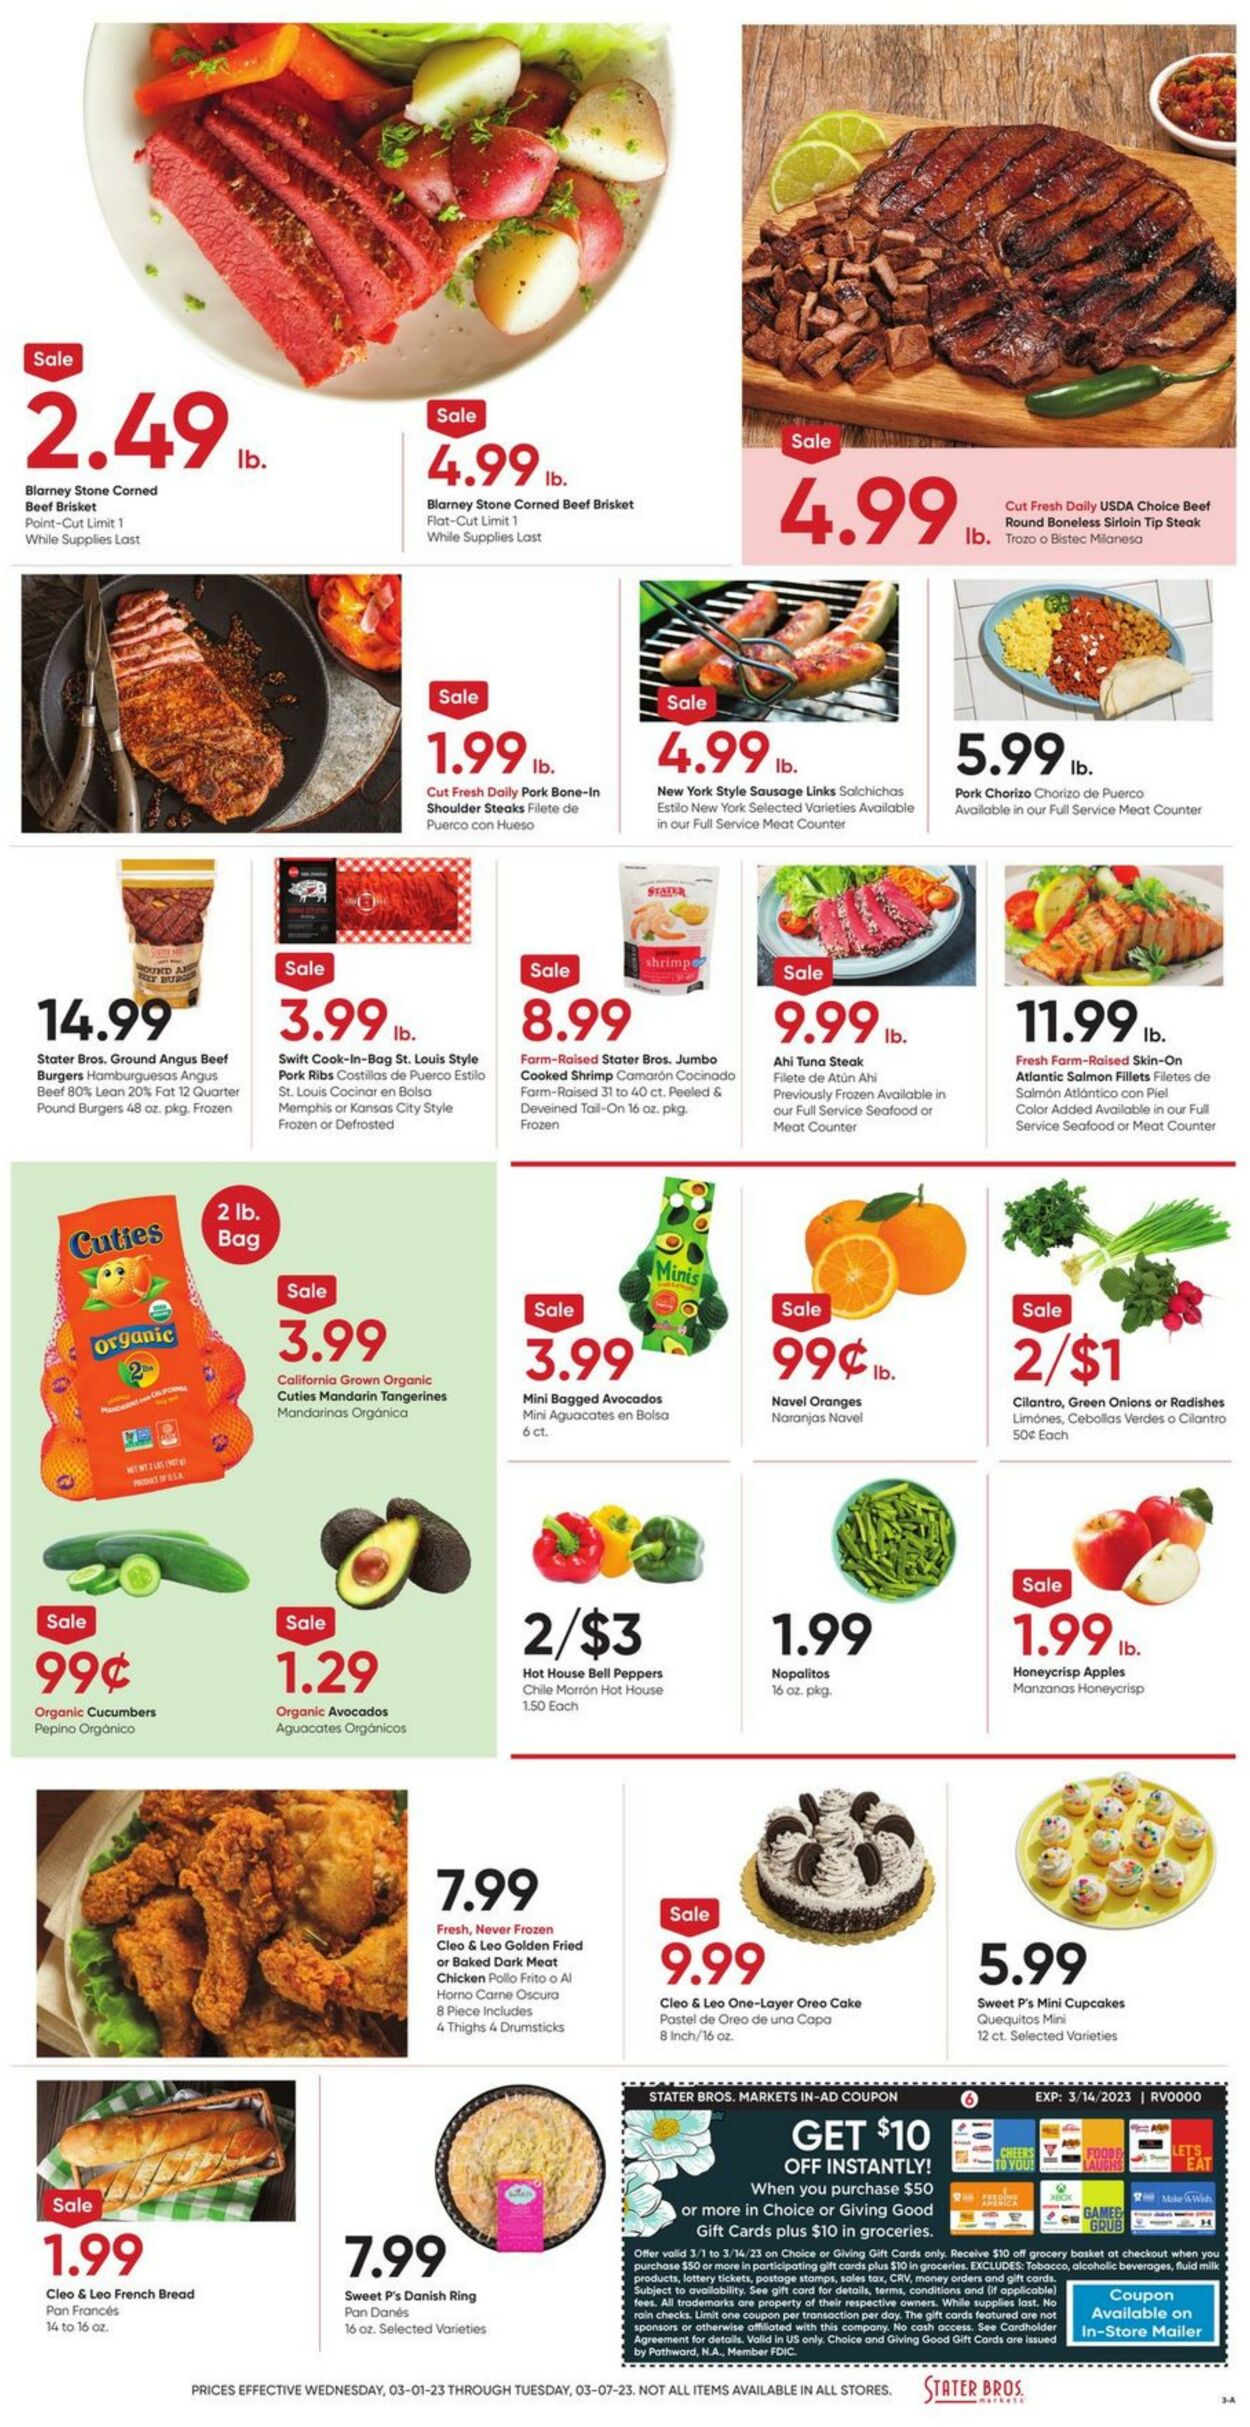 Weekly ad Stater Bros 03/01/2023 - 03/07/2023